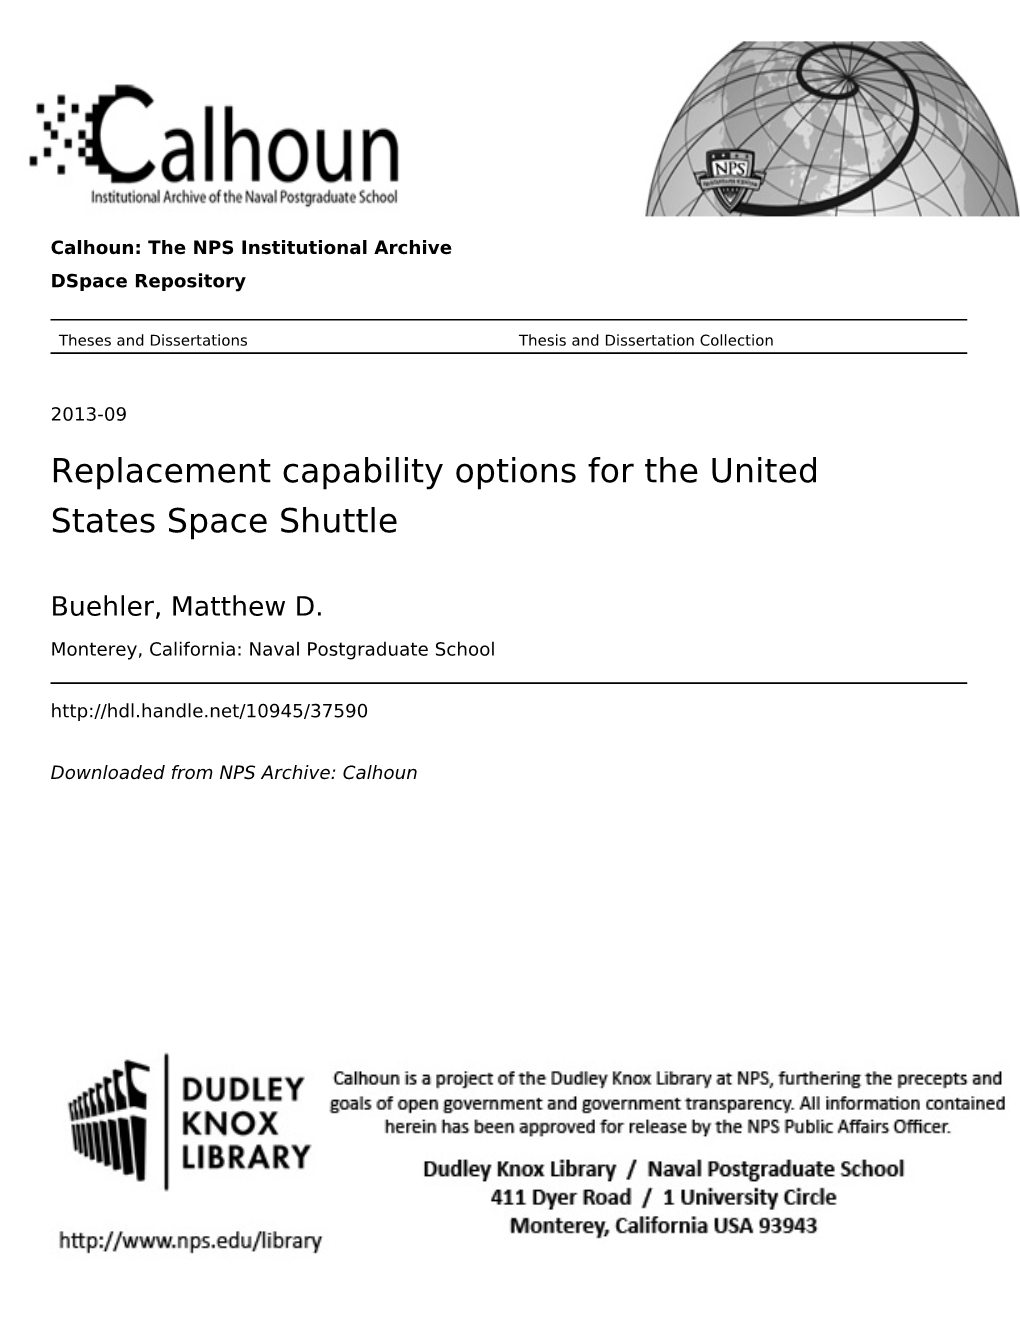 Replacement Capability Options for the United States Space Shuttle